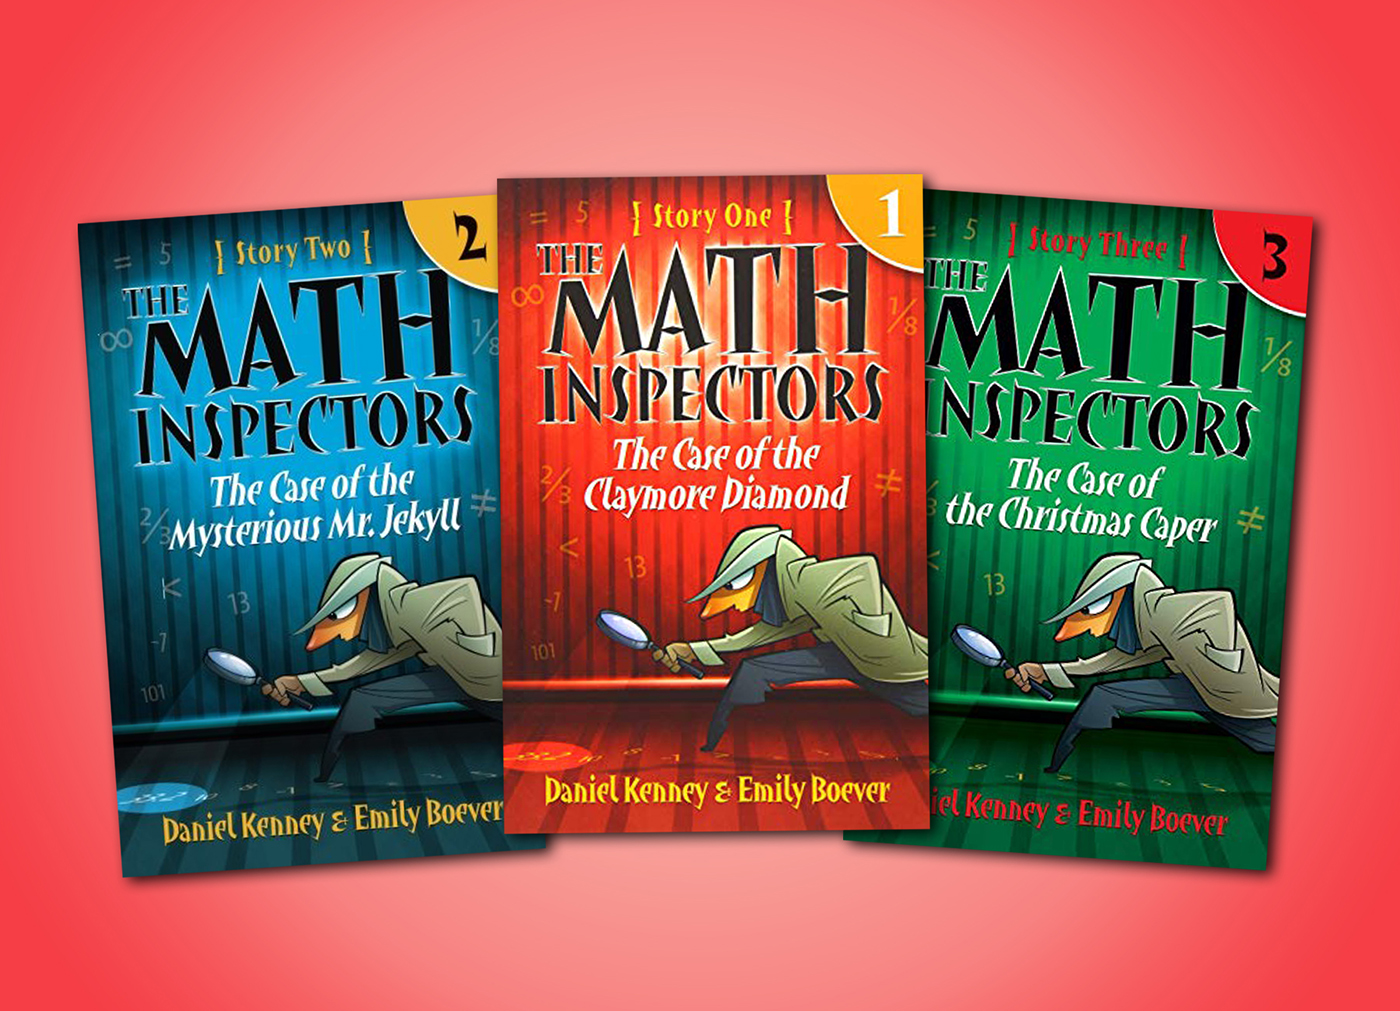 The Math Inspectors Series by Daniel Kenney and Emily Boever